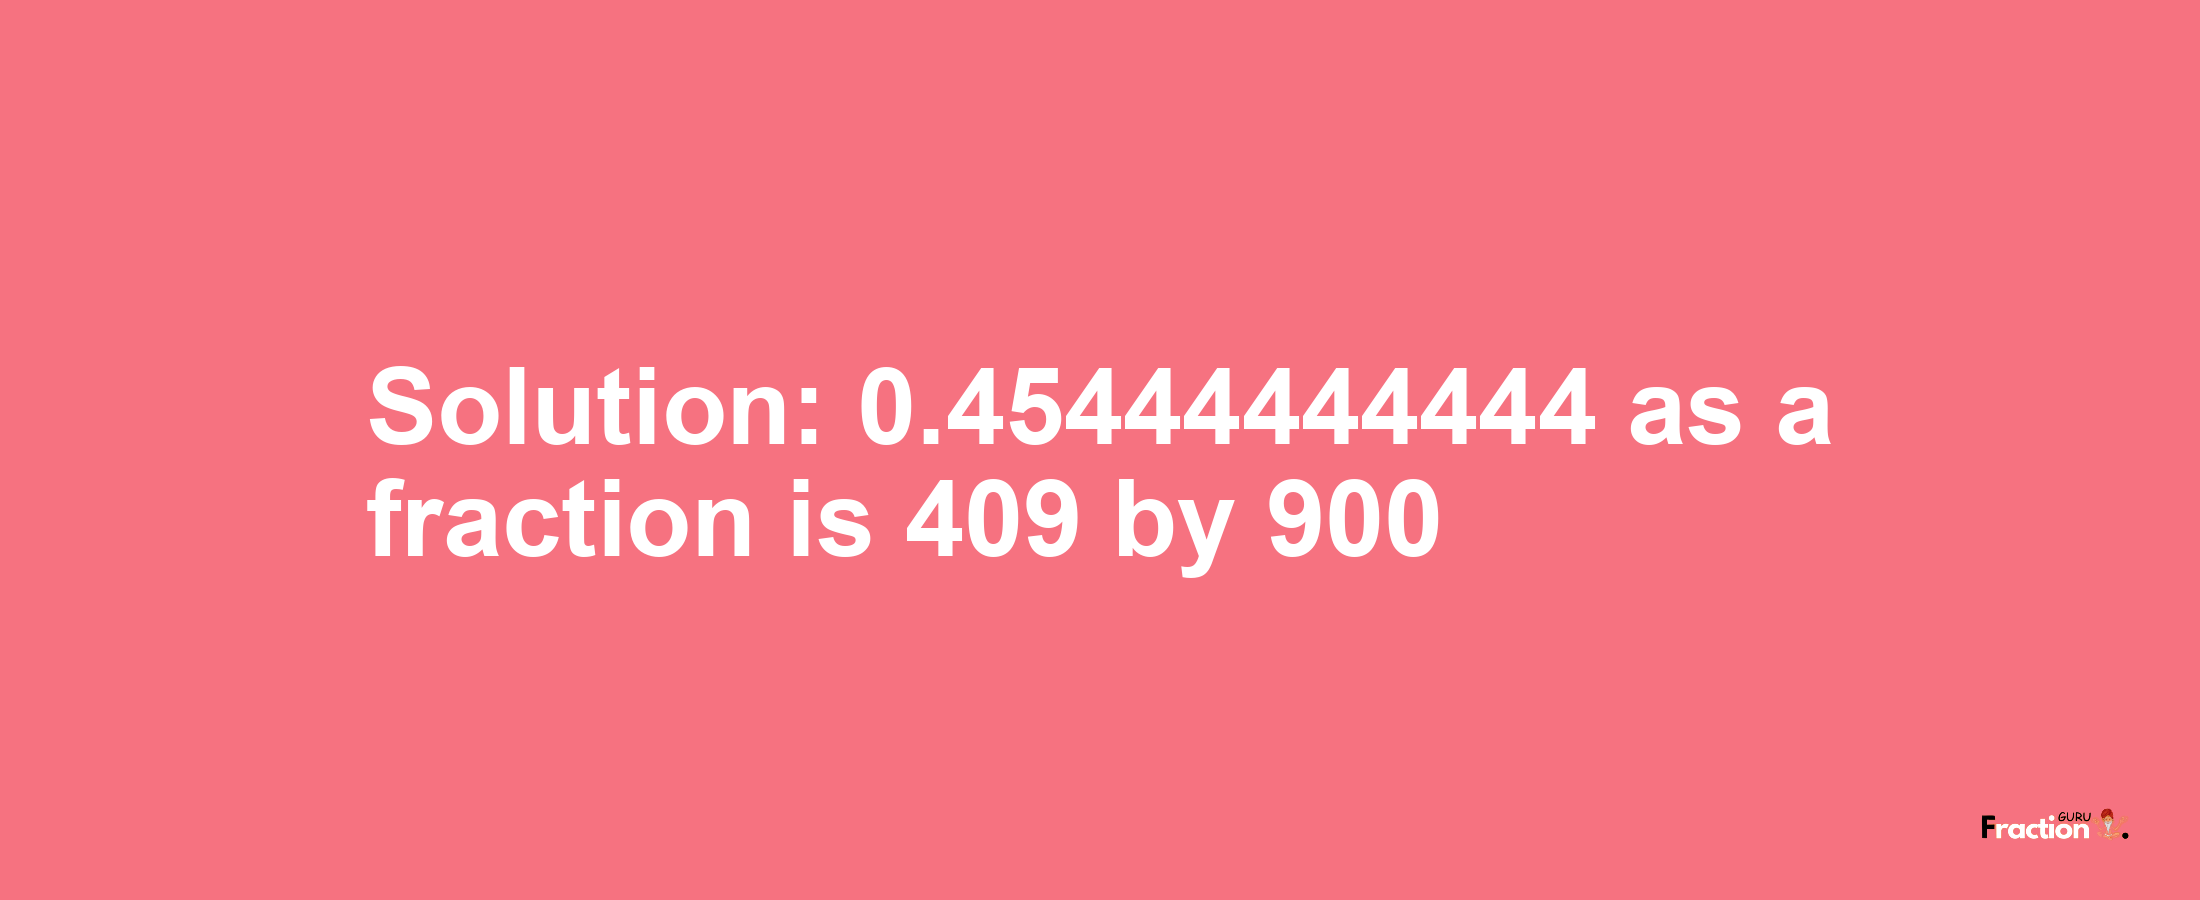 Solution:0.45444444444 as a fraction is 409/900